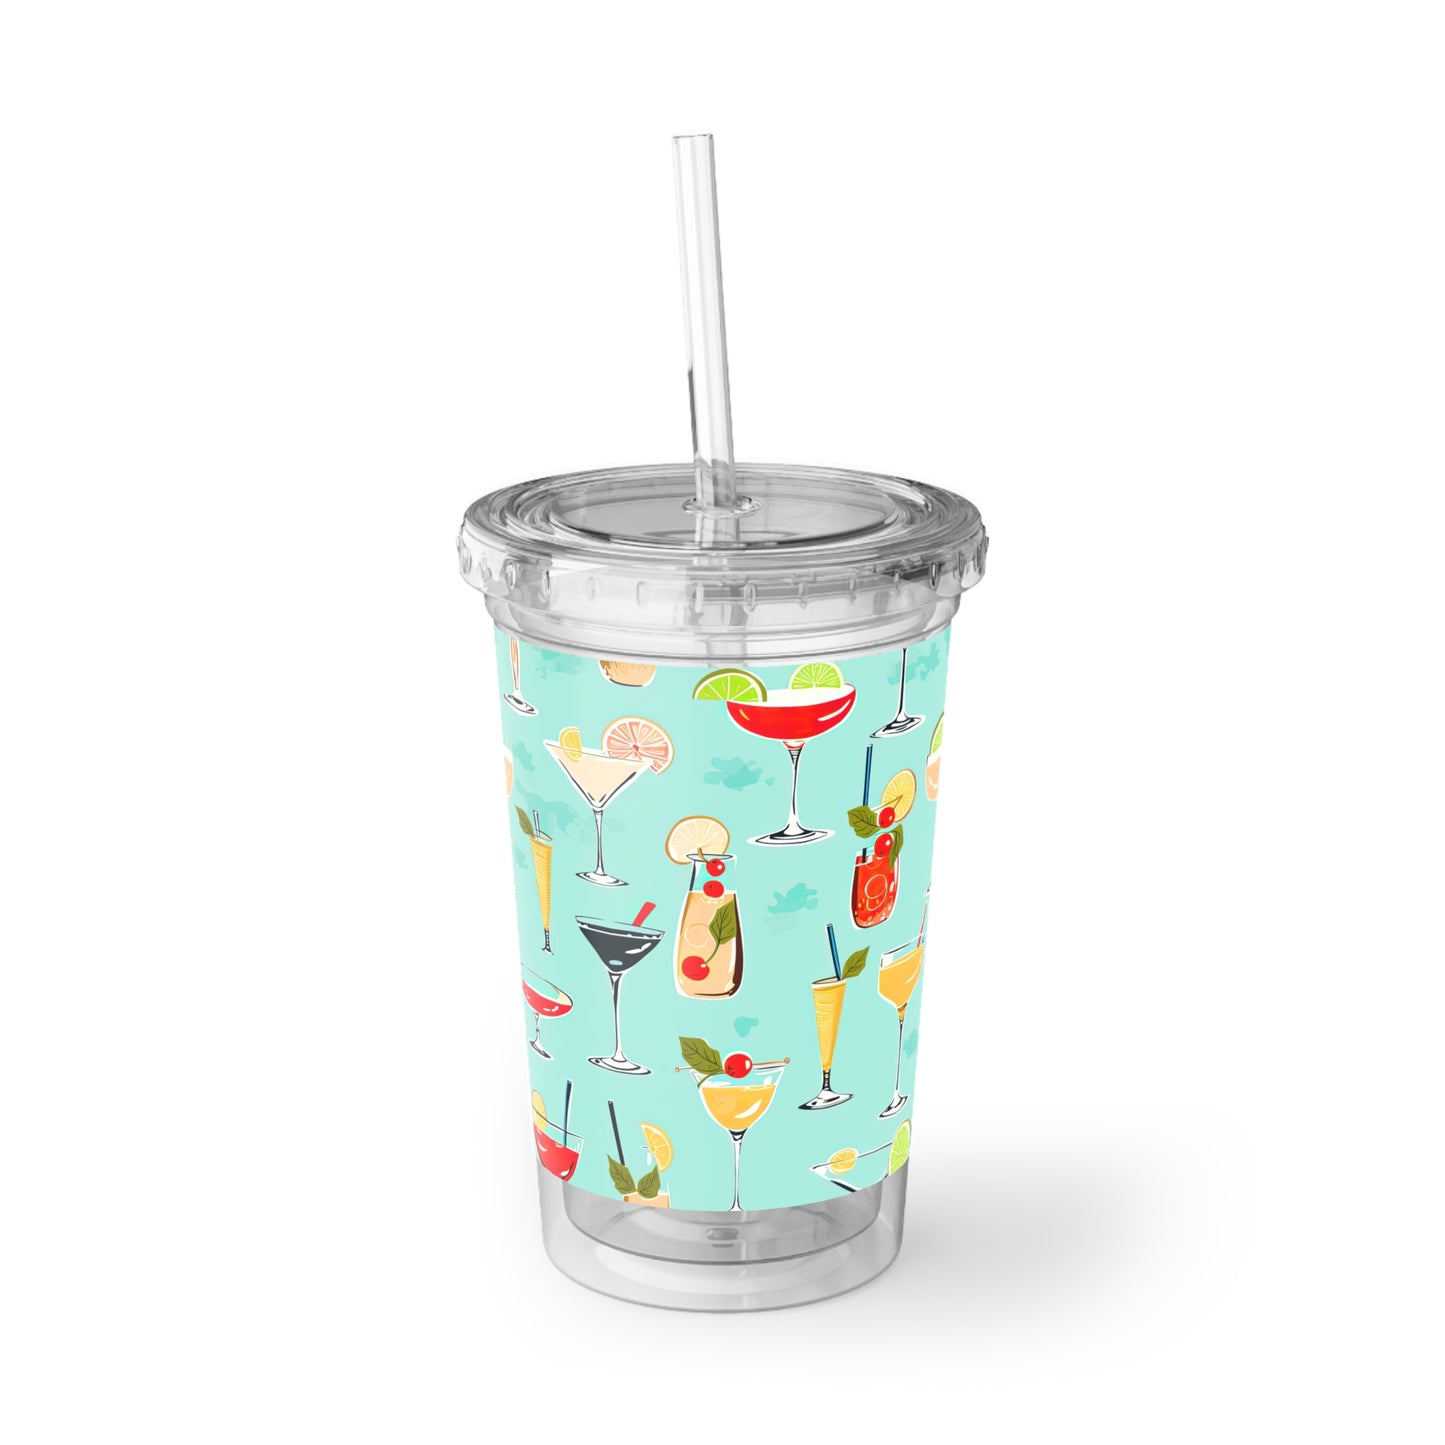 Seaside Coastal Cocktails Midcentury Modern Pattern Entertaining Party Beverage Travel Suave Acrylic Cup